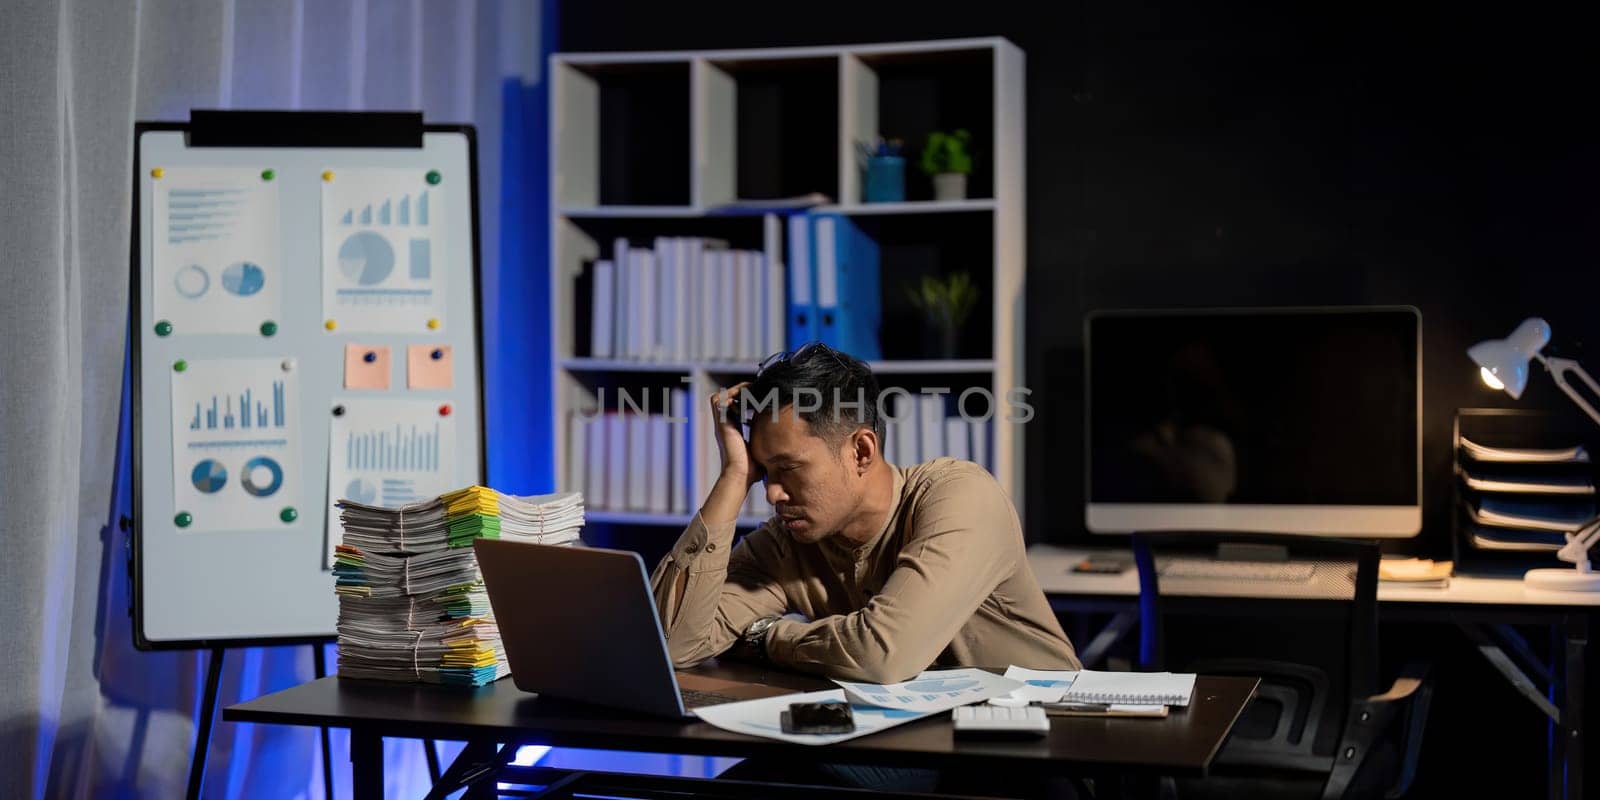 Overworked young Asian office employee working on laptop computer overtime in office at night.